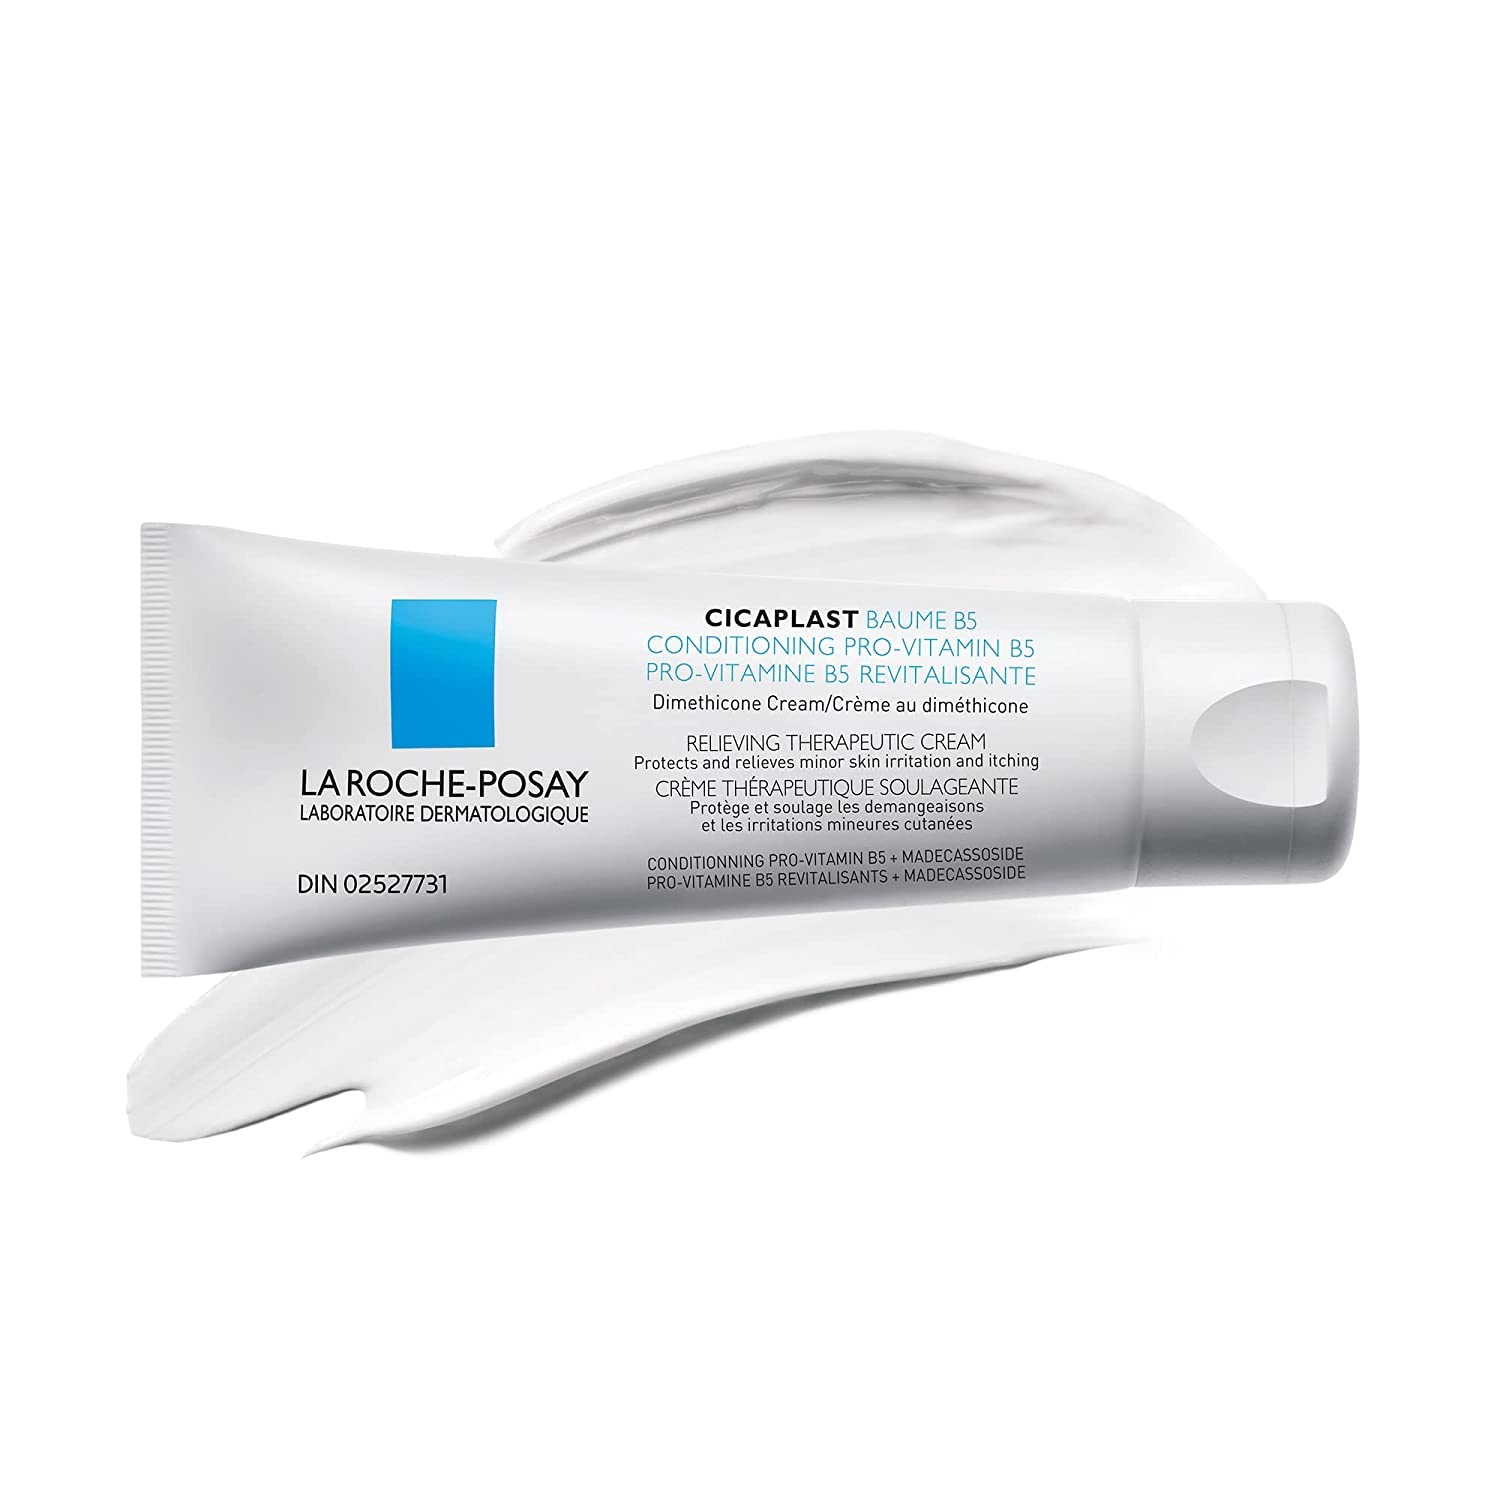 La Roche-Posay Cicaplast Baume B5 Dry Skin Repair Multipurpose Balm Moisturizer, For Babies, Children, Adolescents & Adults With 9% Dimethicone. Suitable For Sensitive Skin & Fragrance-free